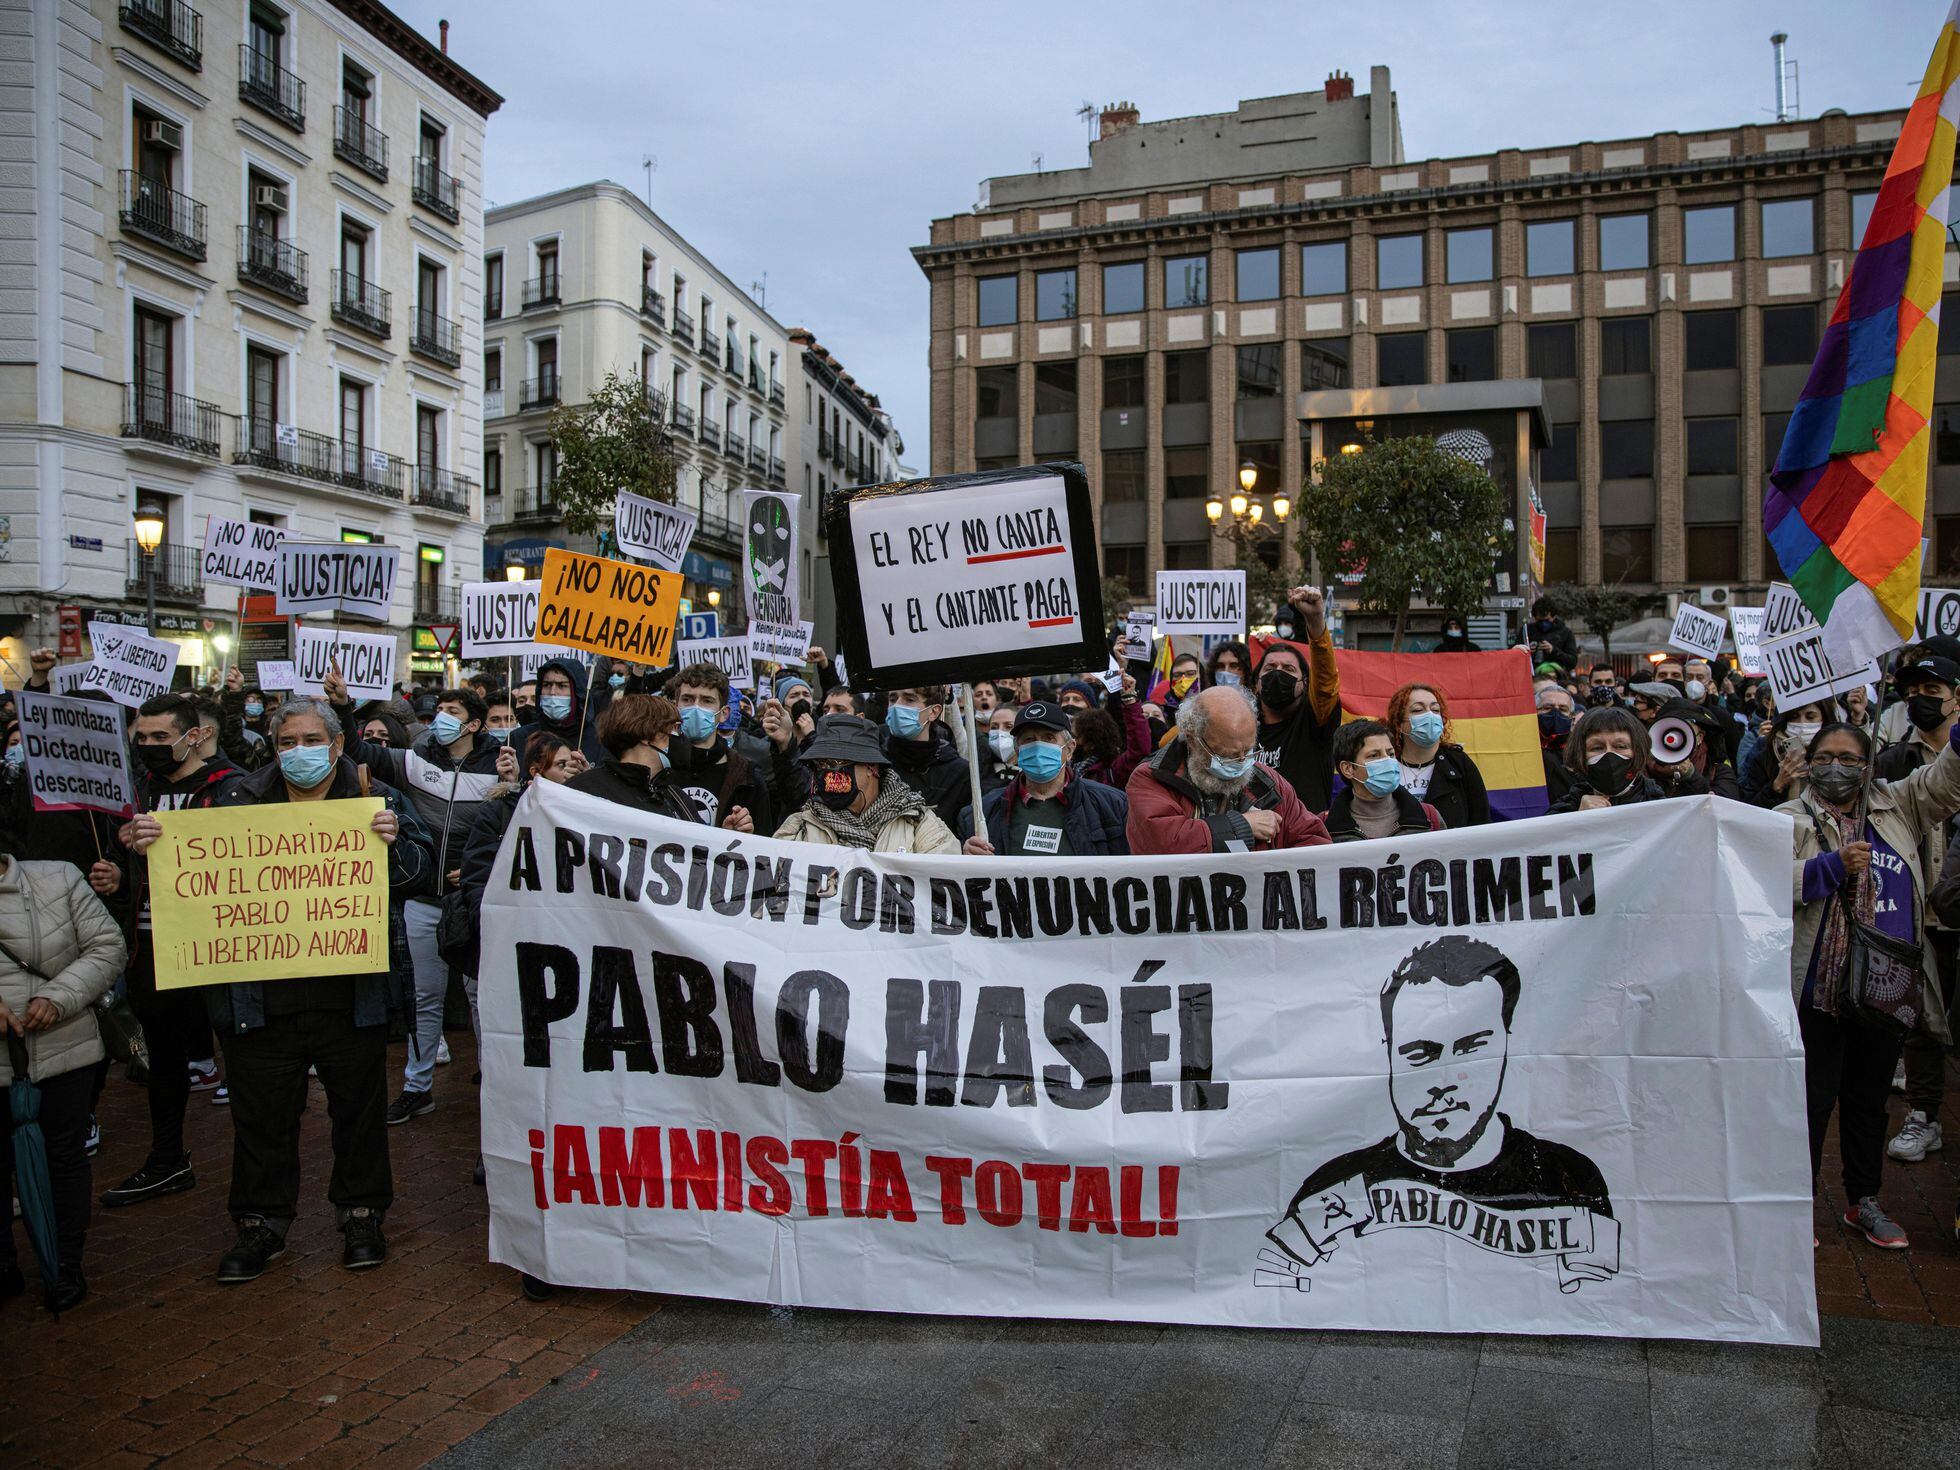 Freedom of speech in Spain: After rapper Pablo Hasél gets jail for tweets,  Spain plans to end prison terms for crimes involving freedom of speech |  Spain | EL PAÍS English